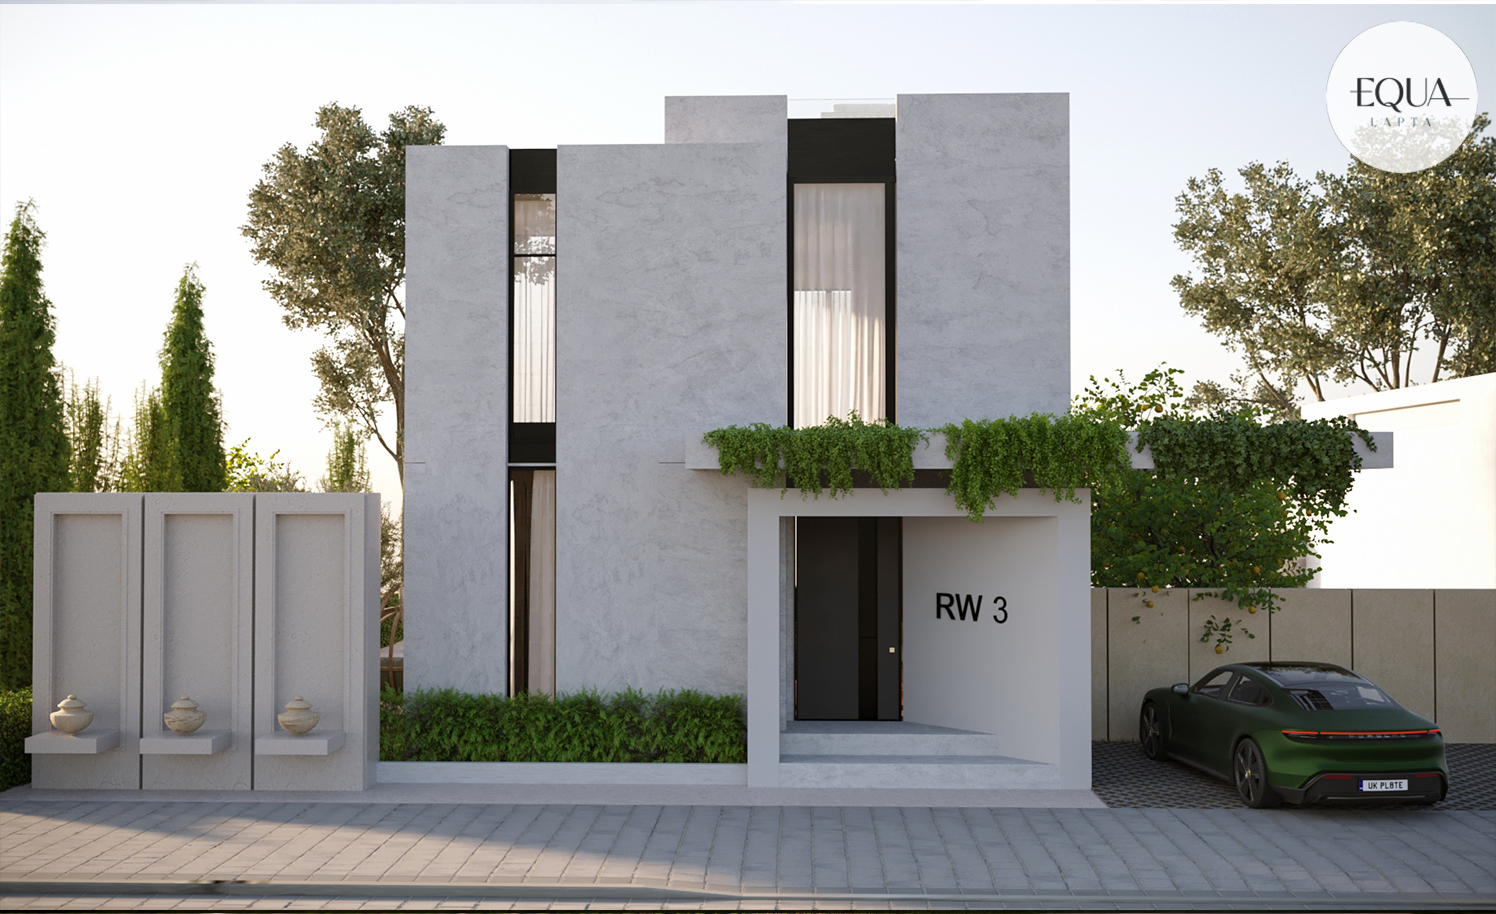 4 Bedroom Row House Type D | Equa Project